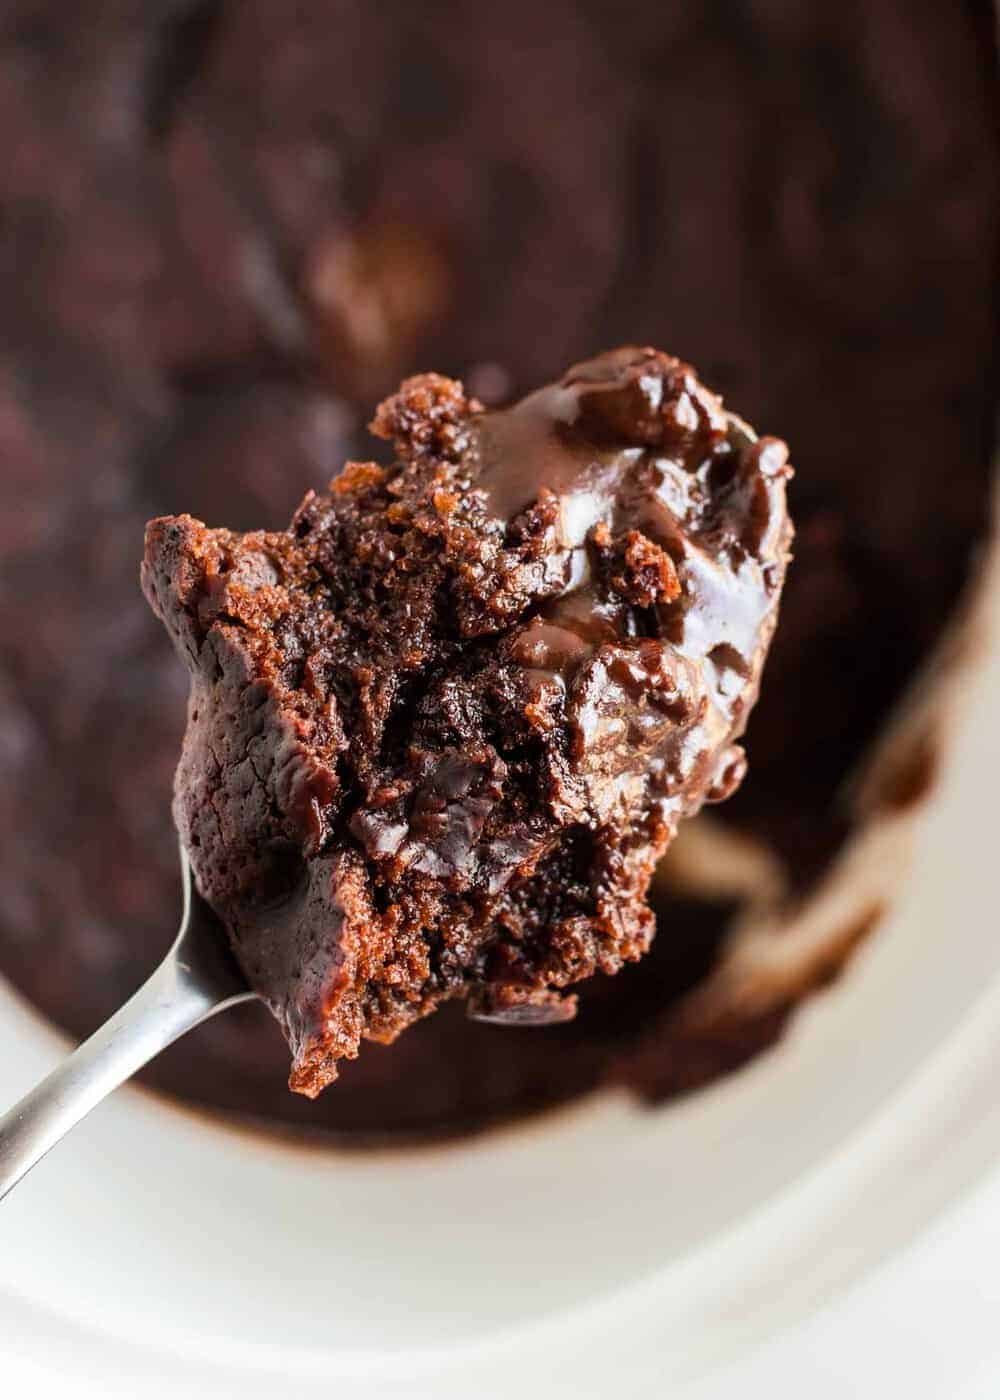 Spoonful of chocolate cake.